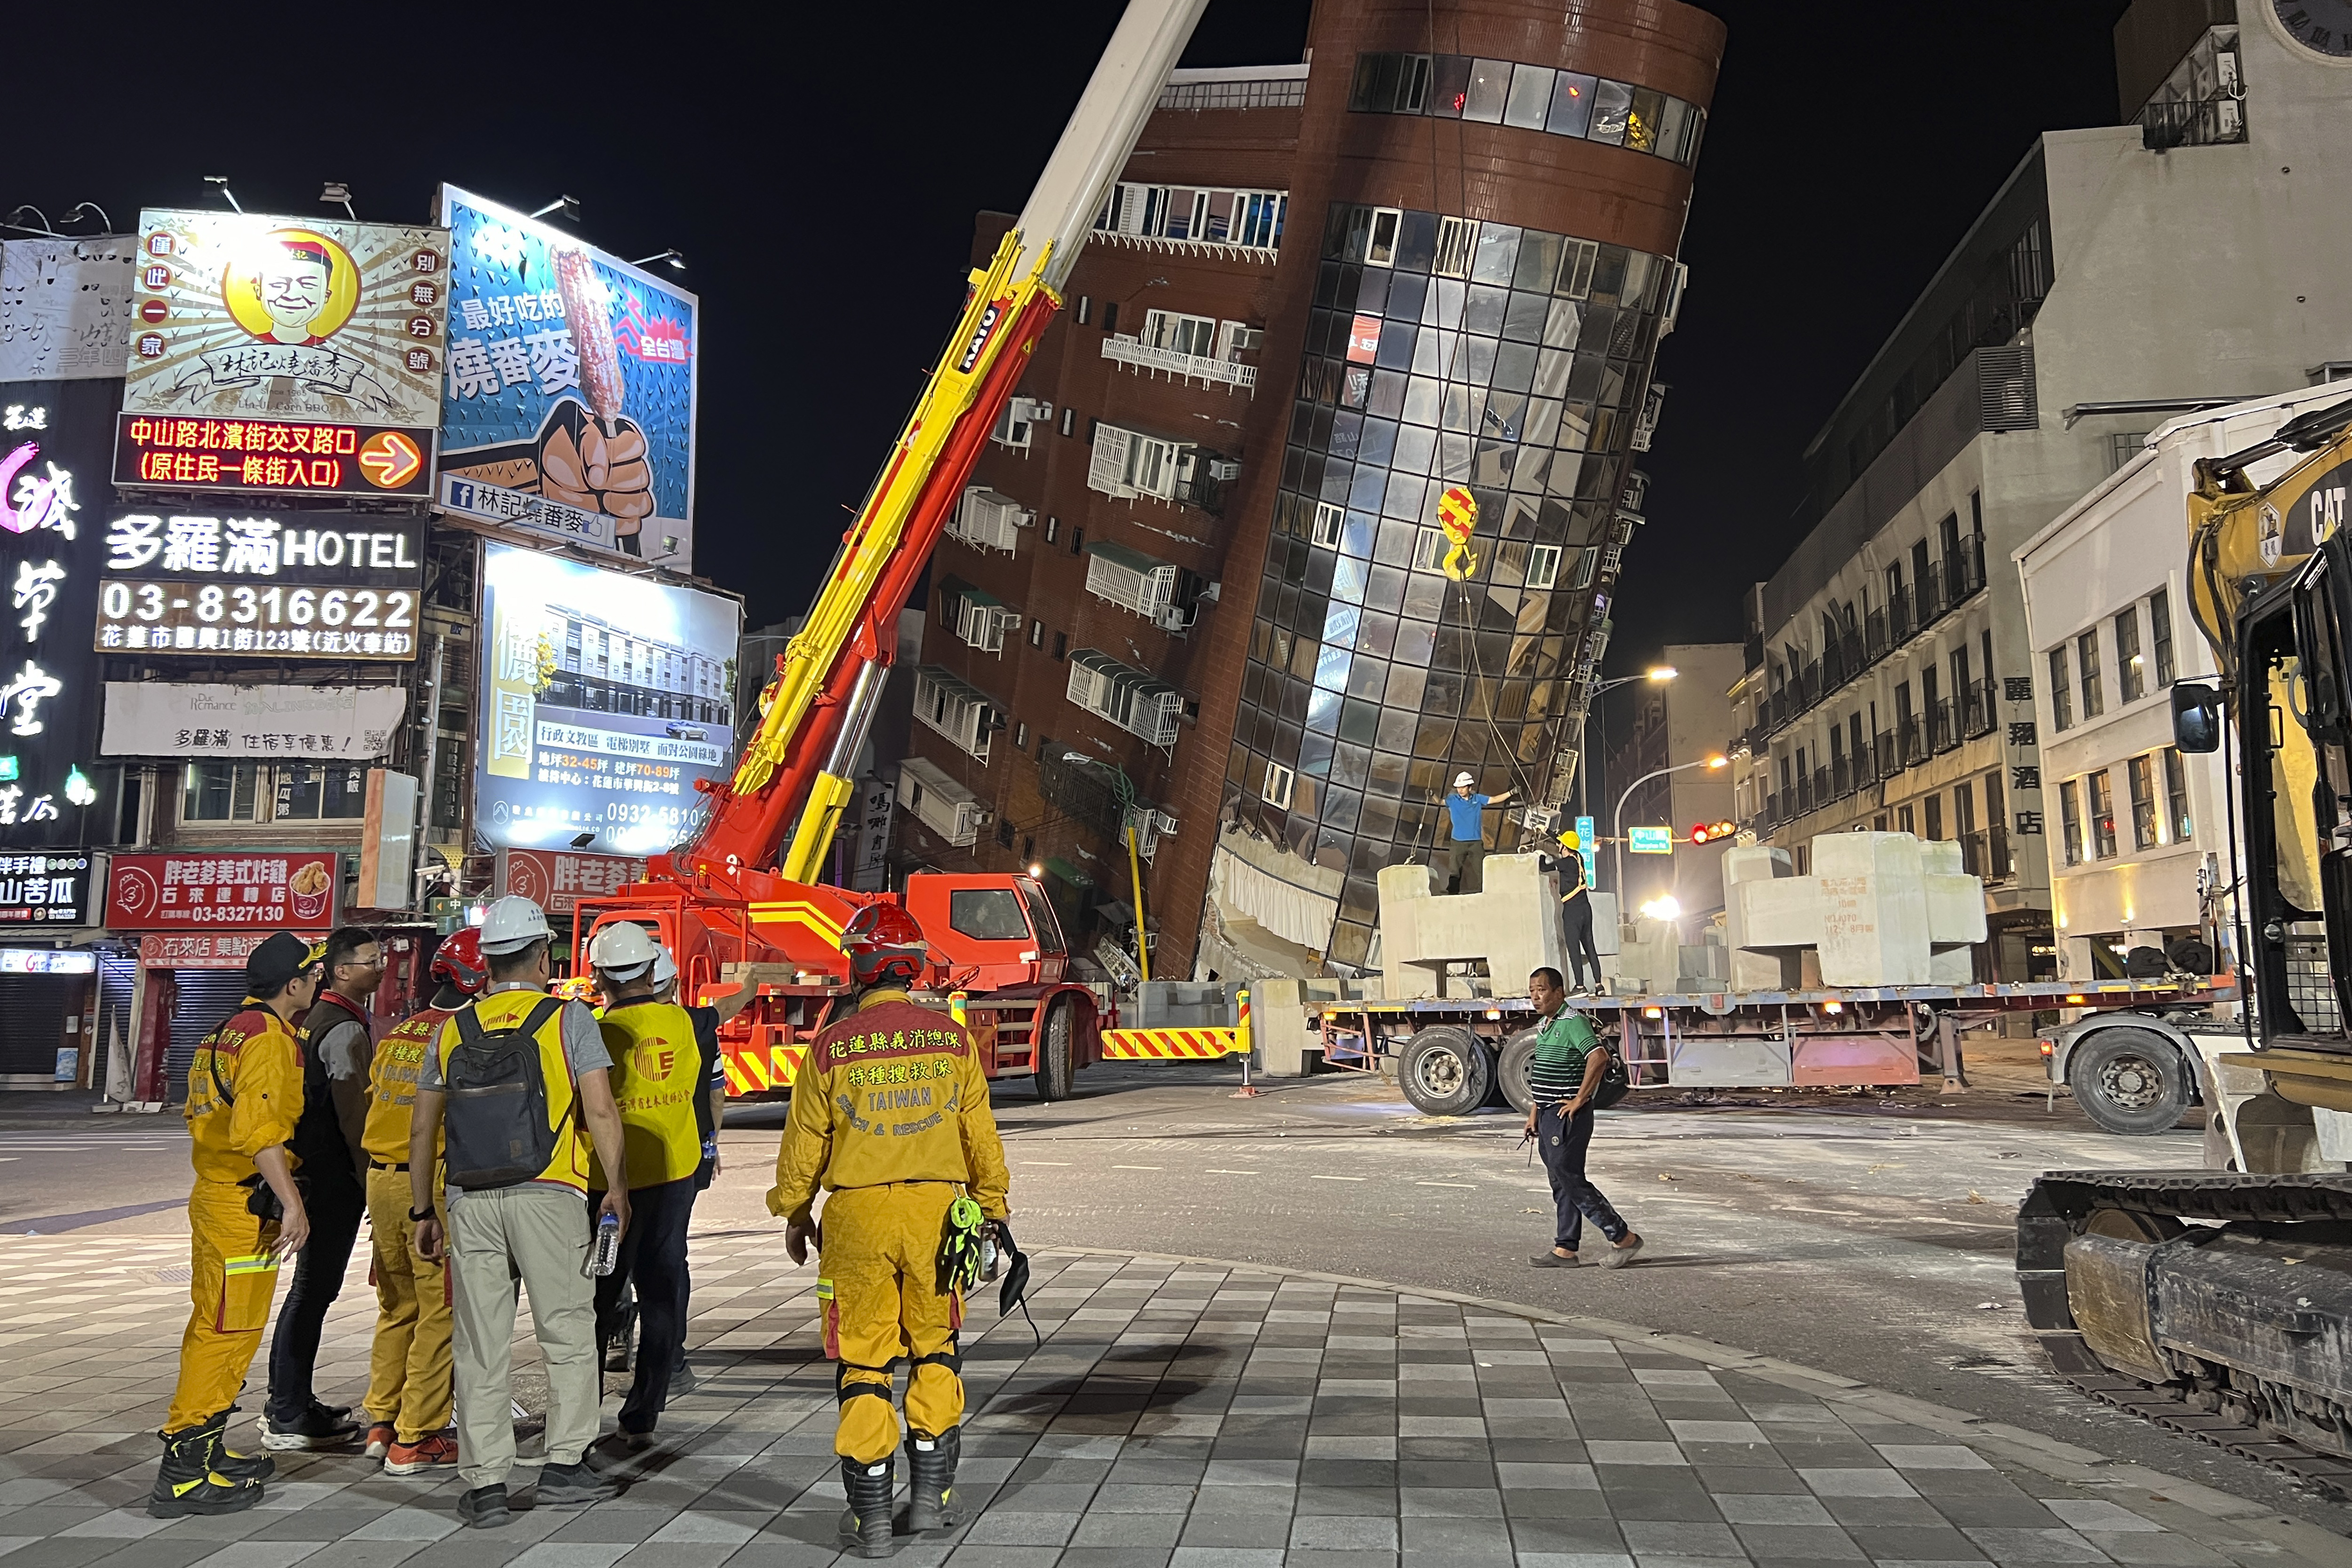 Rescue workers stand near the site of a leaning building in the aftermath of an earthquake in Hualien, Taiwan, on April 3.